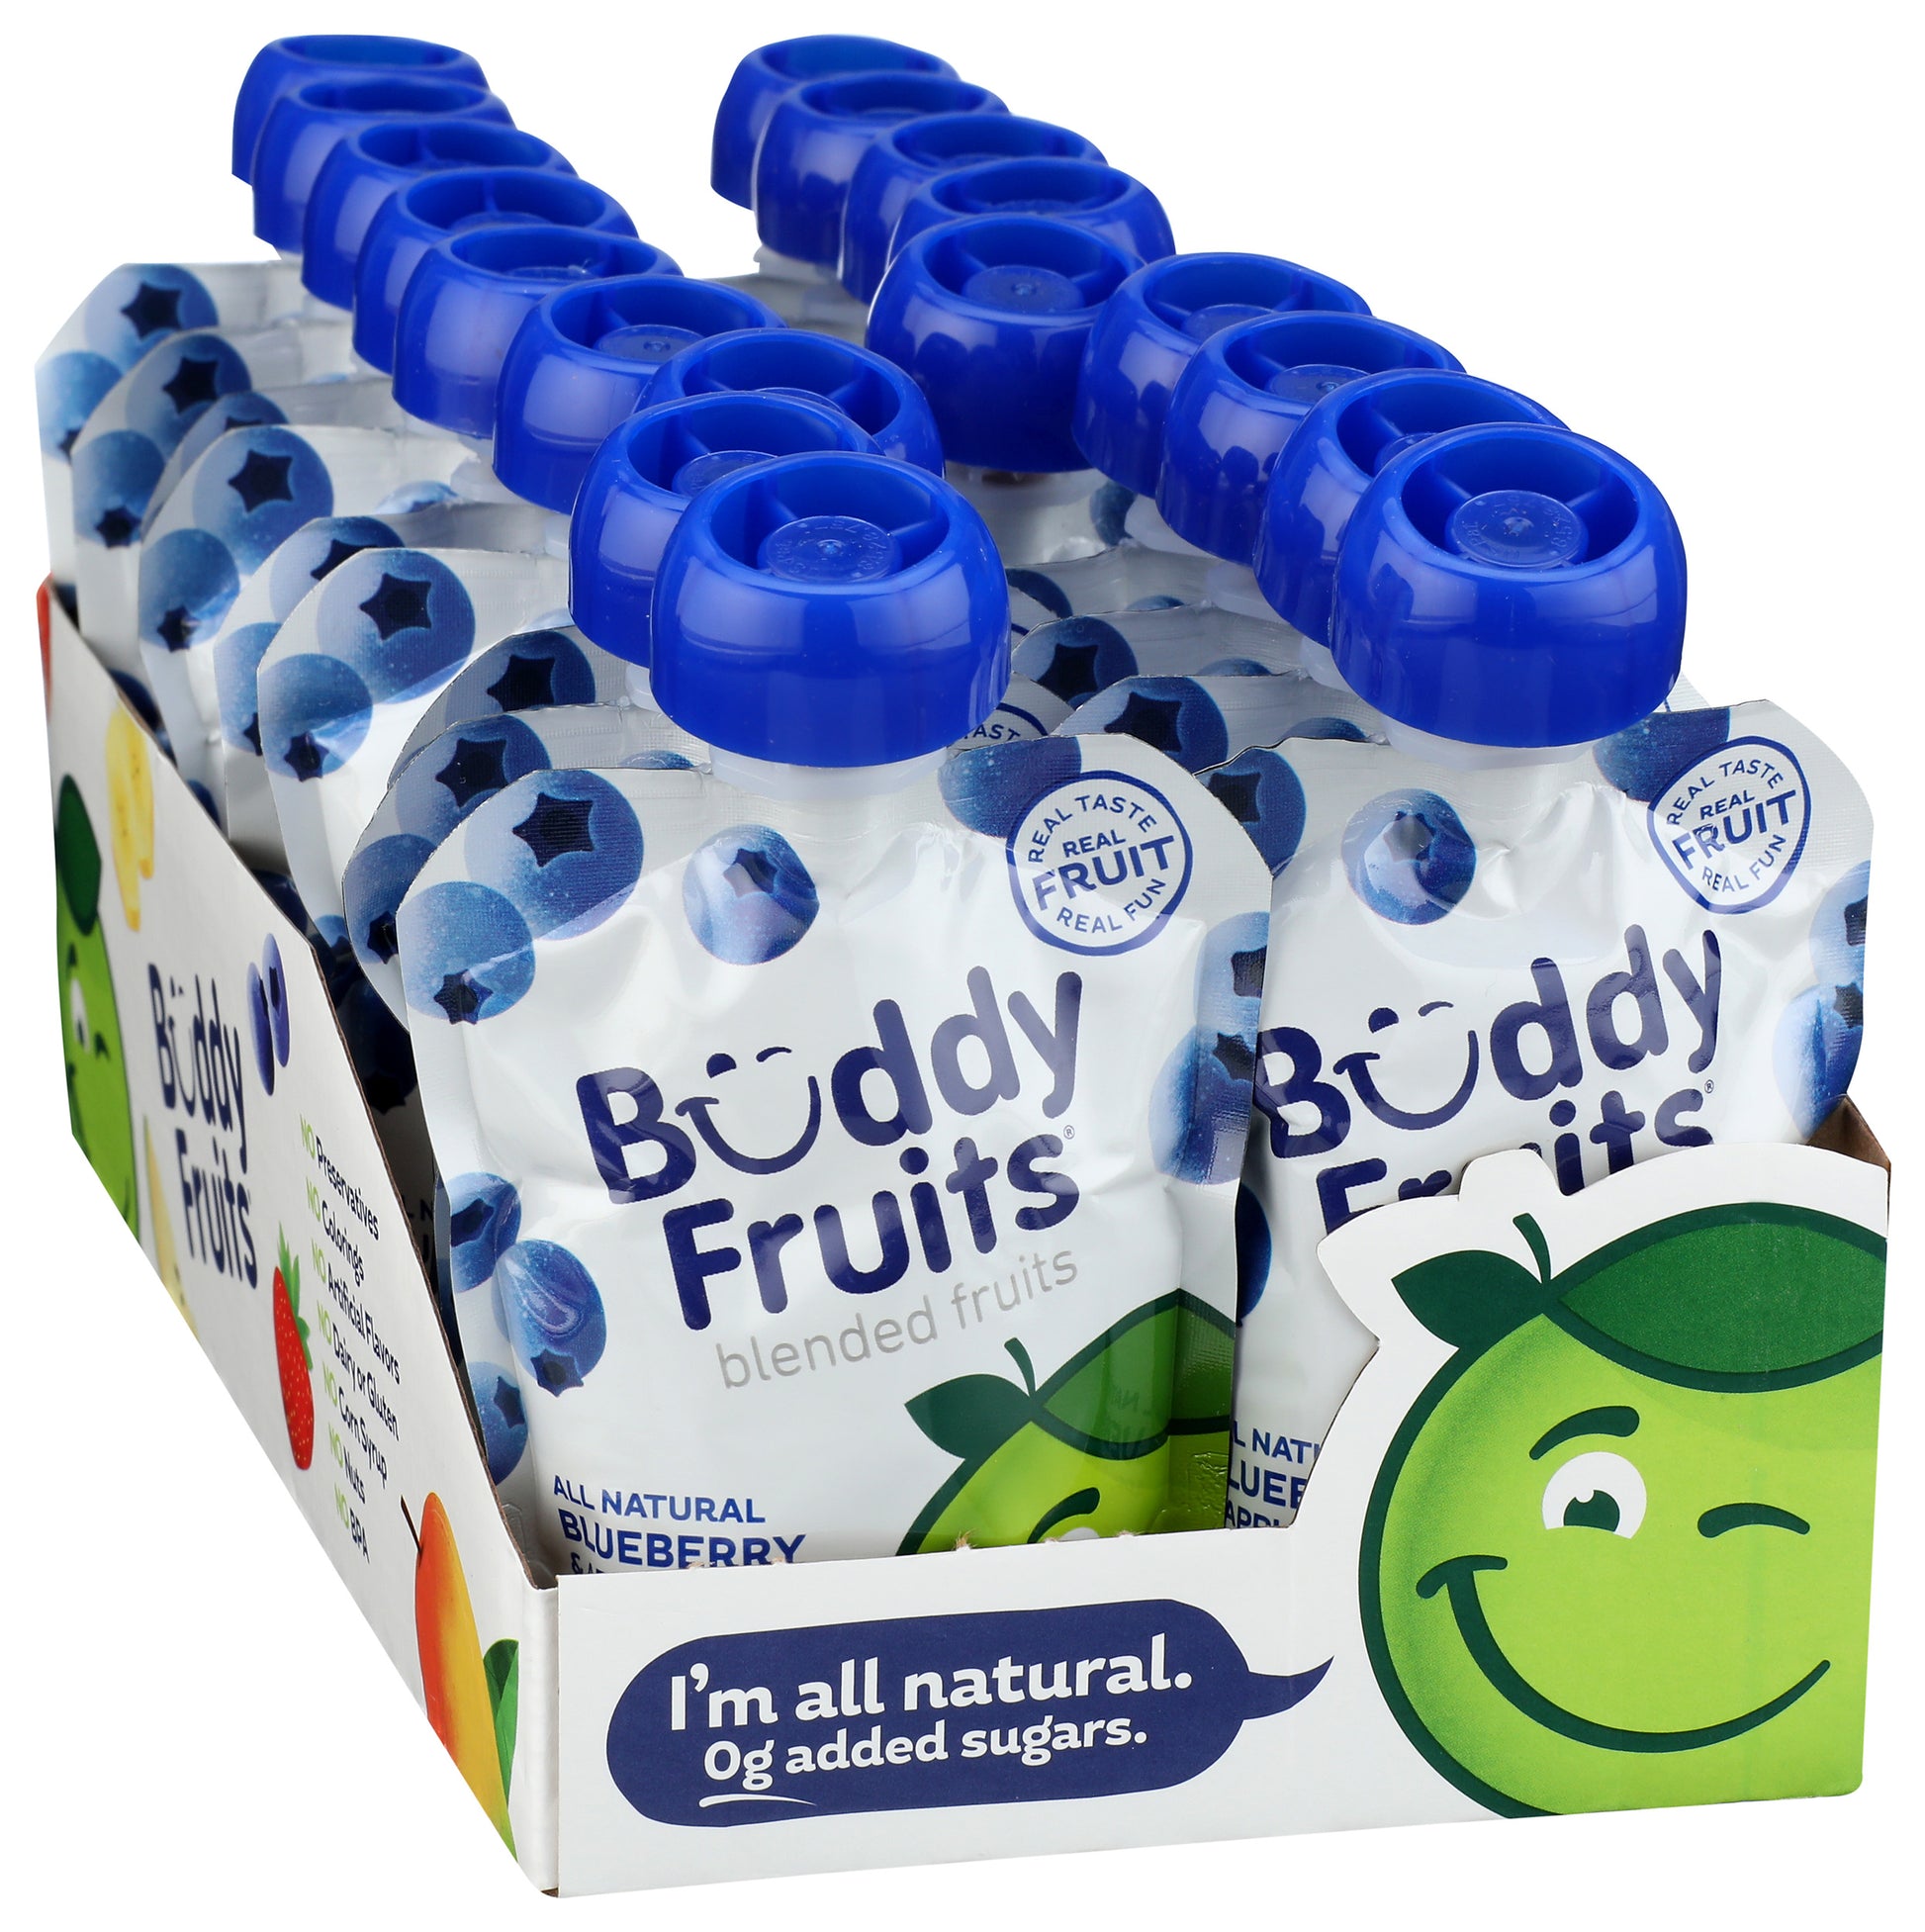 Packaging of 18 pack of Buddy Fruits Blueberry & Apple fruit pouch.